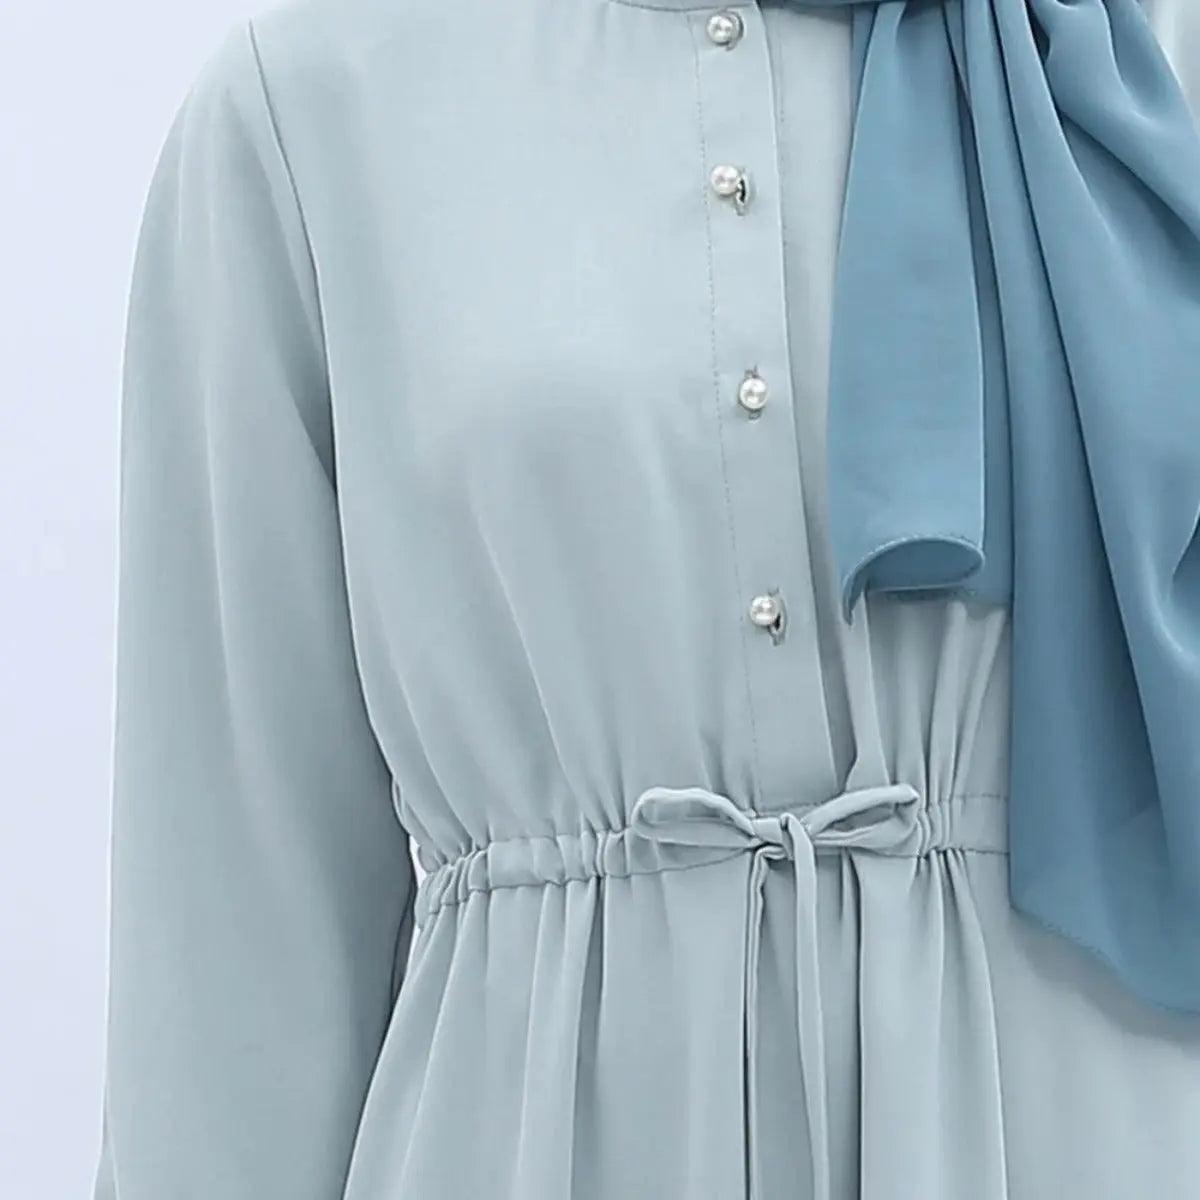 Women's Mint Green Abaya with Pearl Buttons & Pockets - Mariam's Collection - Mariam's Collection